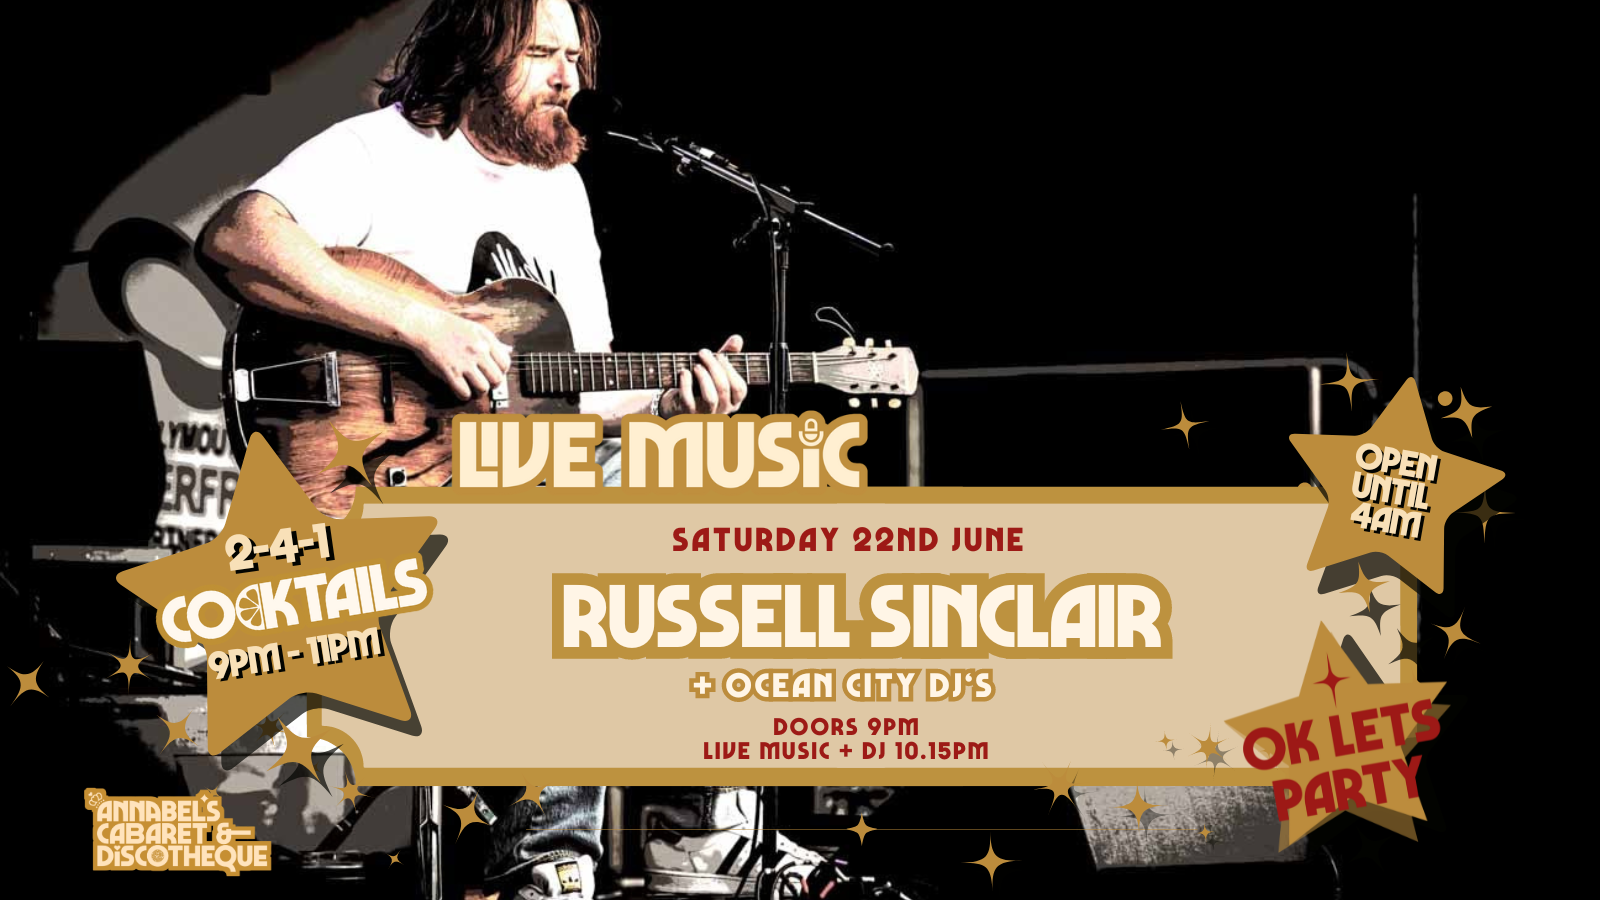 Live Music: RUSSELL SINCLAIR // Annabel’s Cabaret & Discotheque